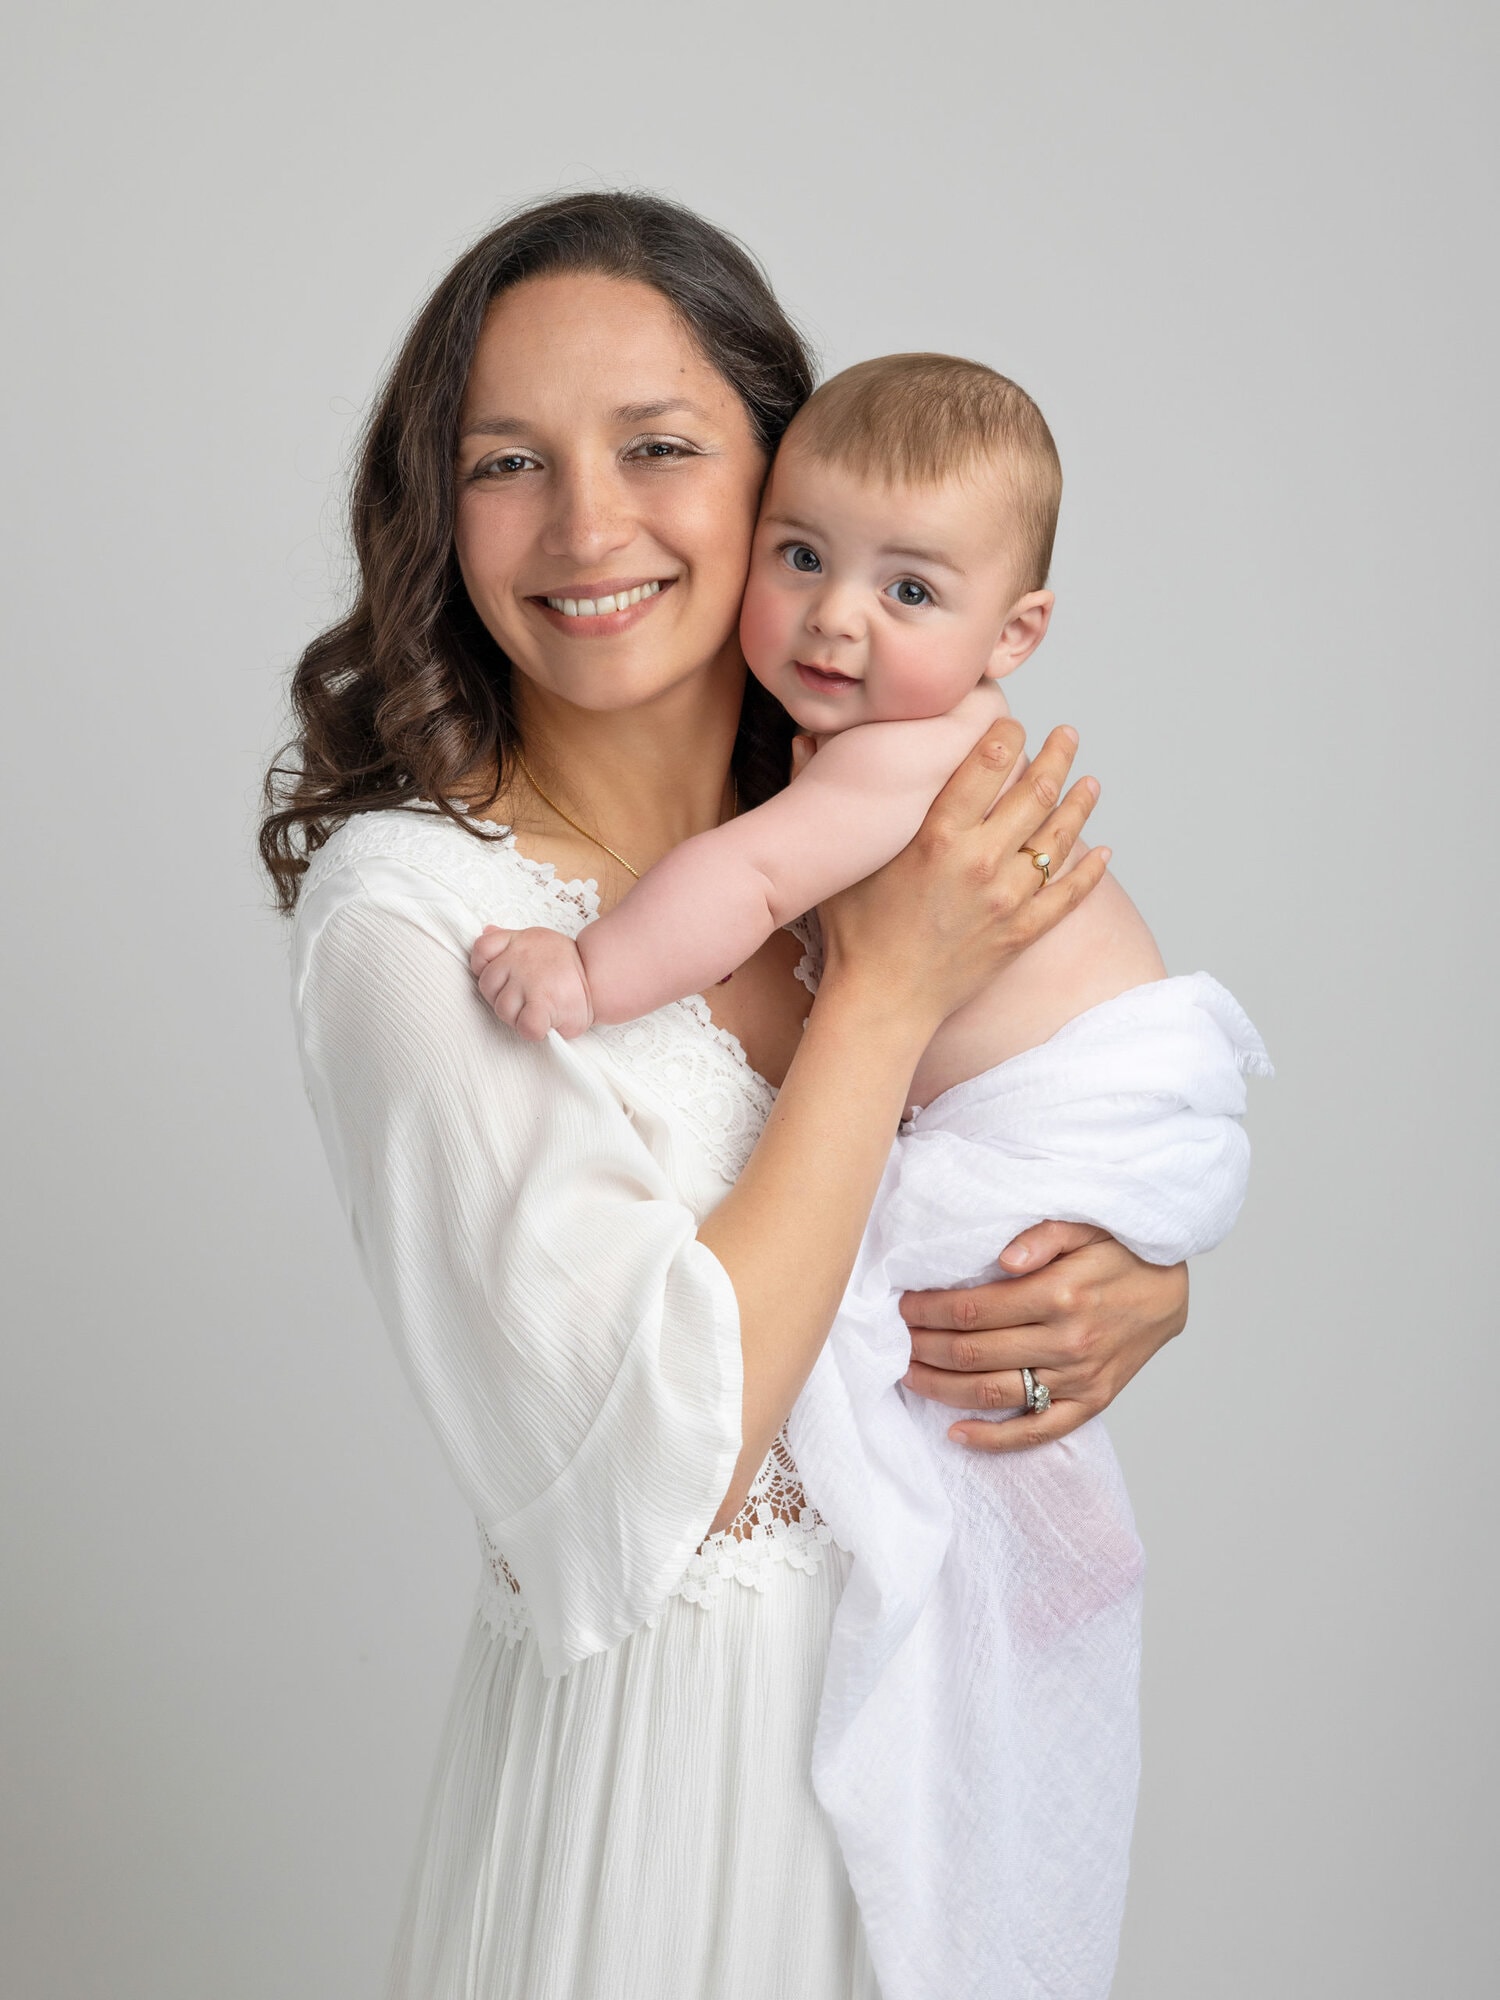 Baby Boy in his Mothers arms, both dressed in white during Baby Photoshoot with Alison McKenny